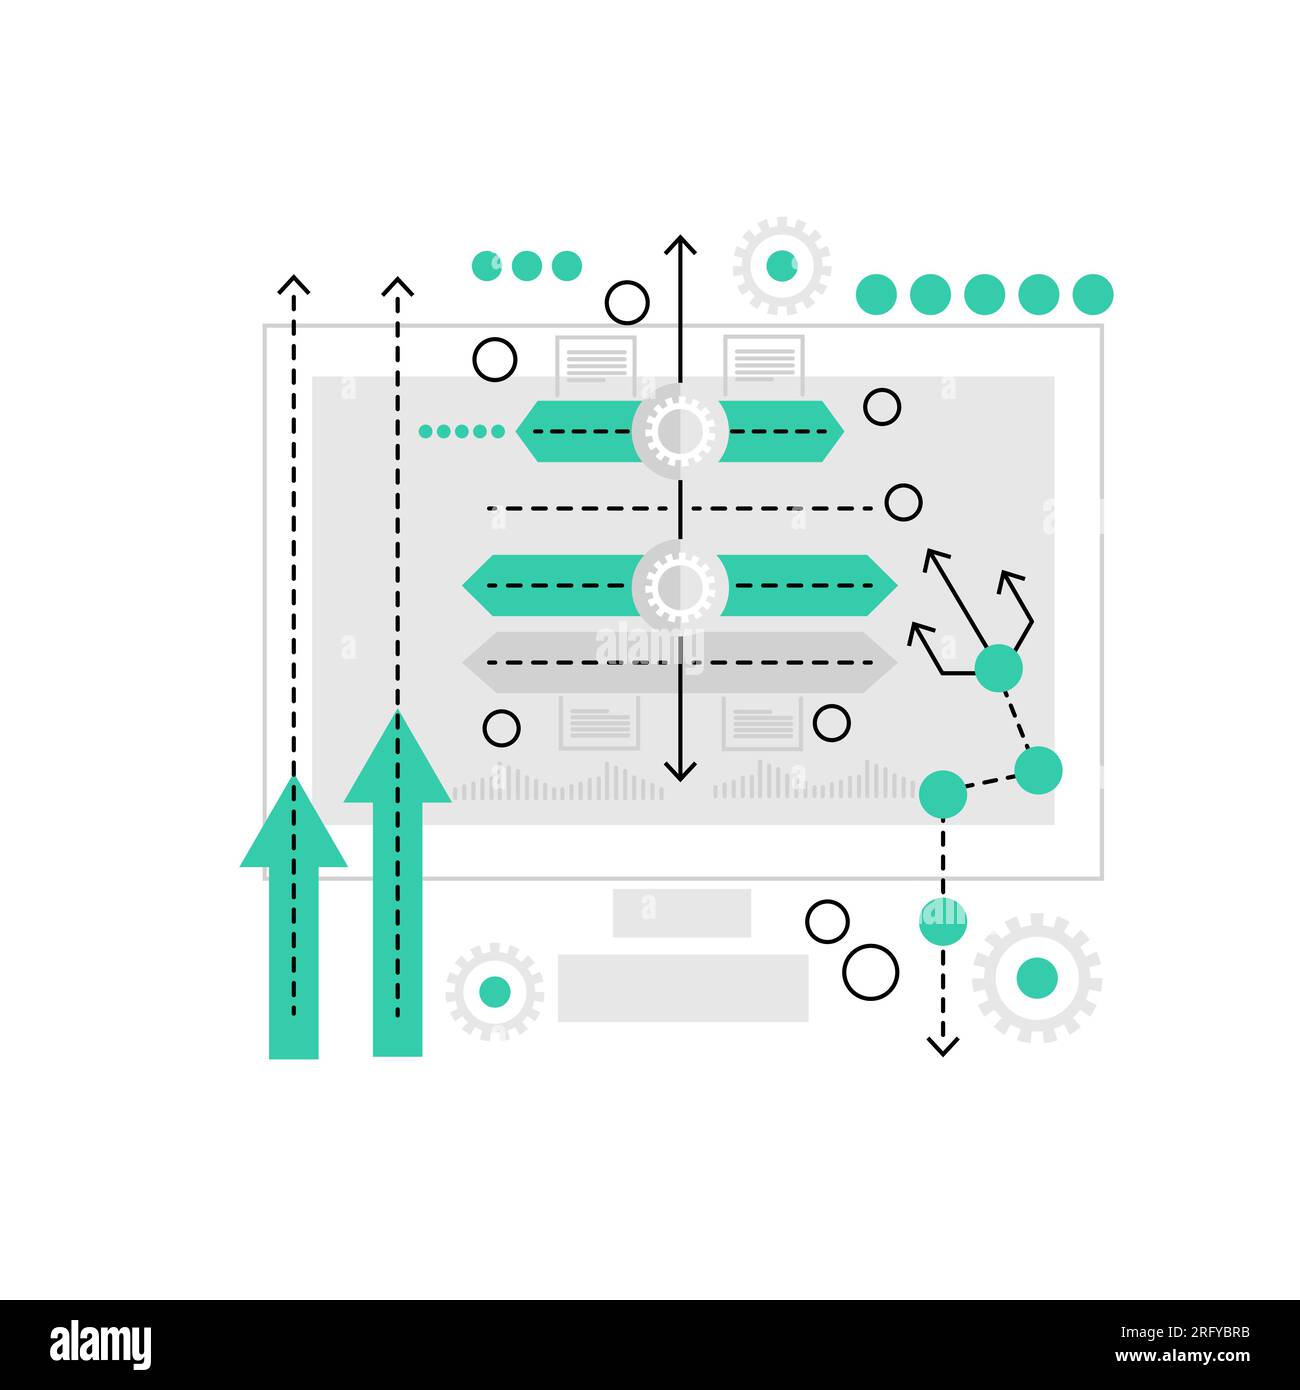 Strategy video game. Arcade map gaming, online playing network vector illustration Stock Vector